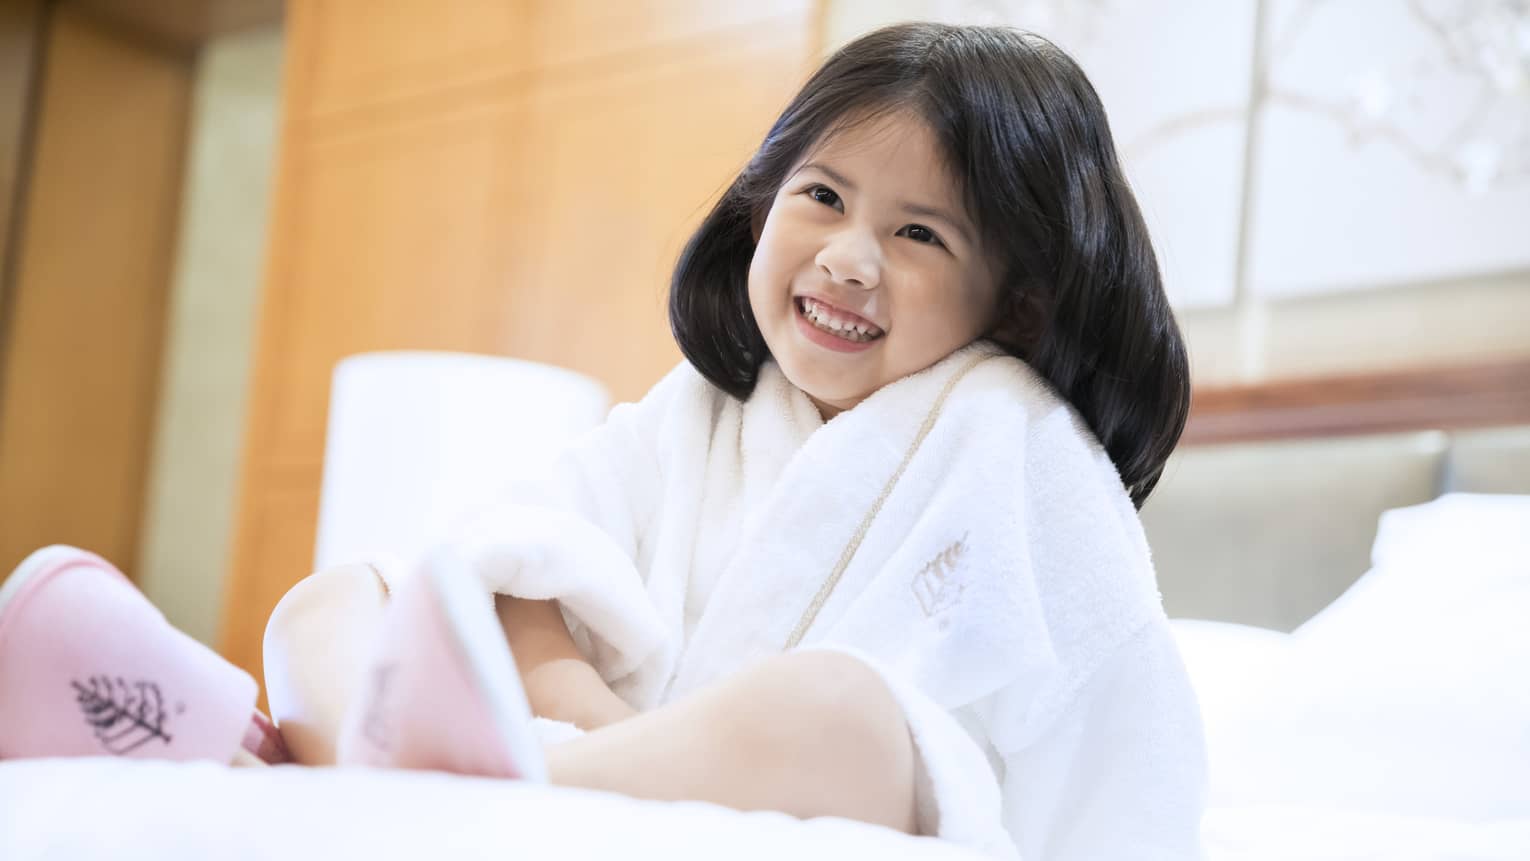 Smiling little girl wearing white bath robe and pink slippers sits on bed